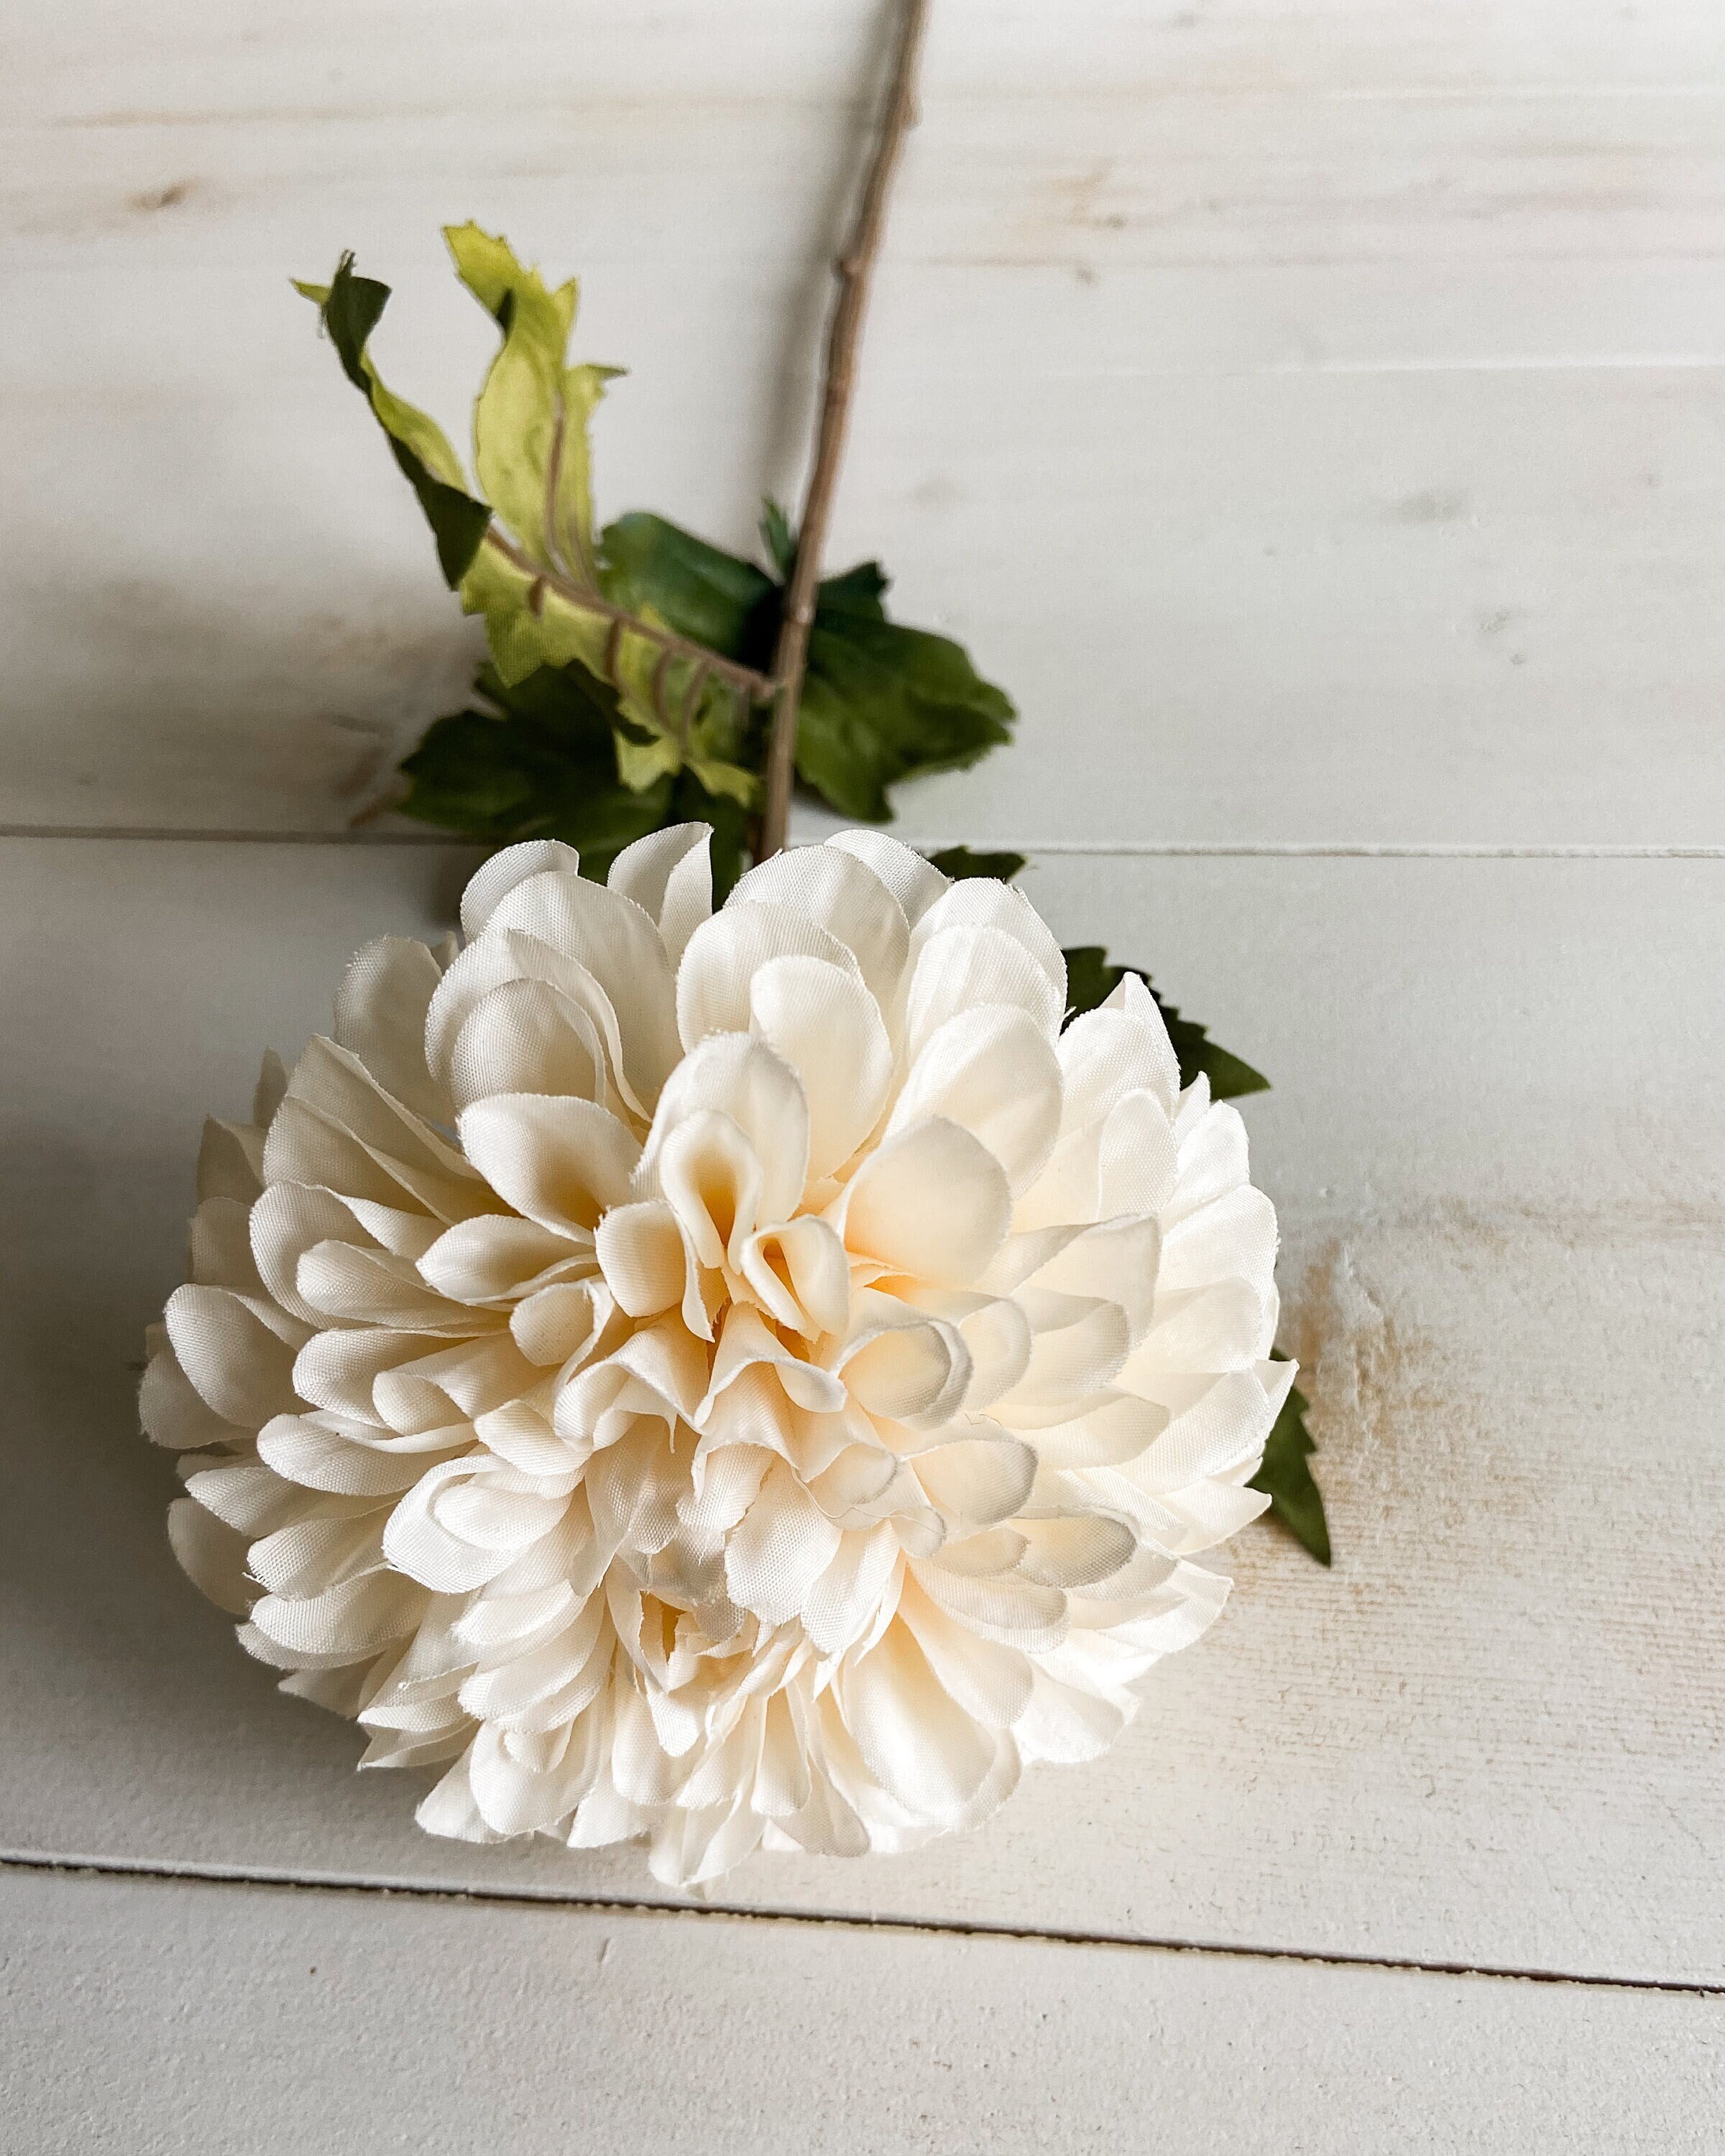 Dried Dahlia Flower Stems Bouquet With Color Options 